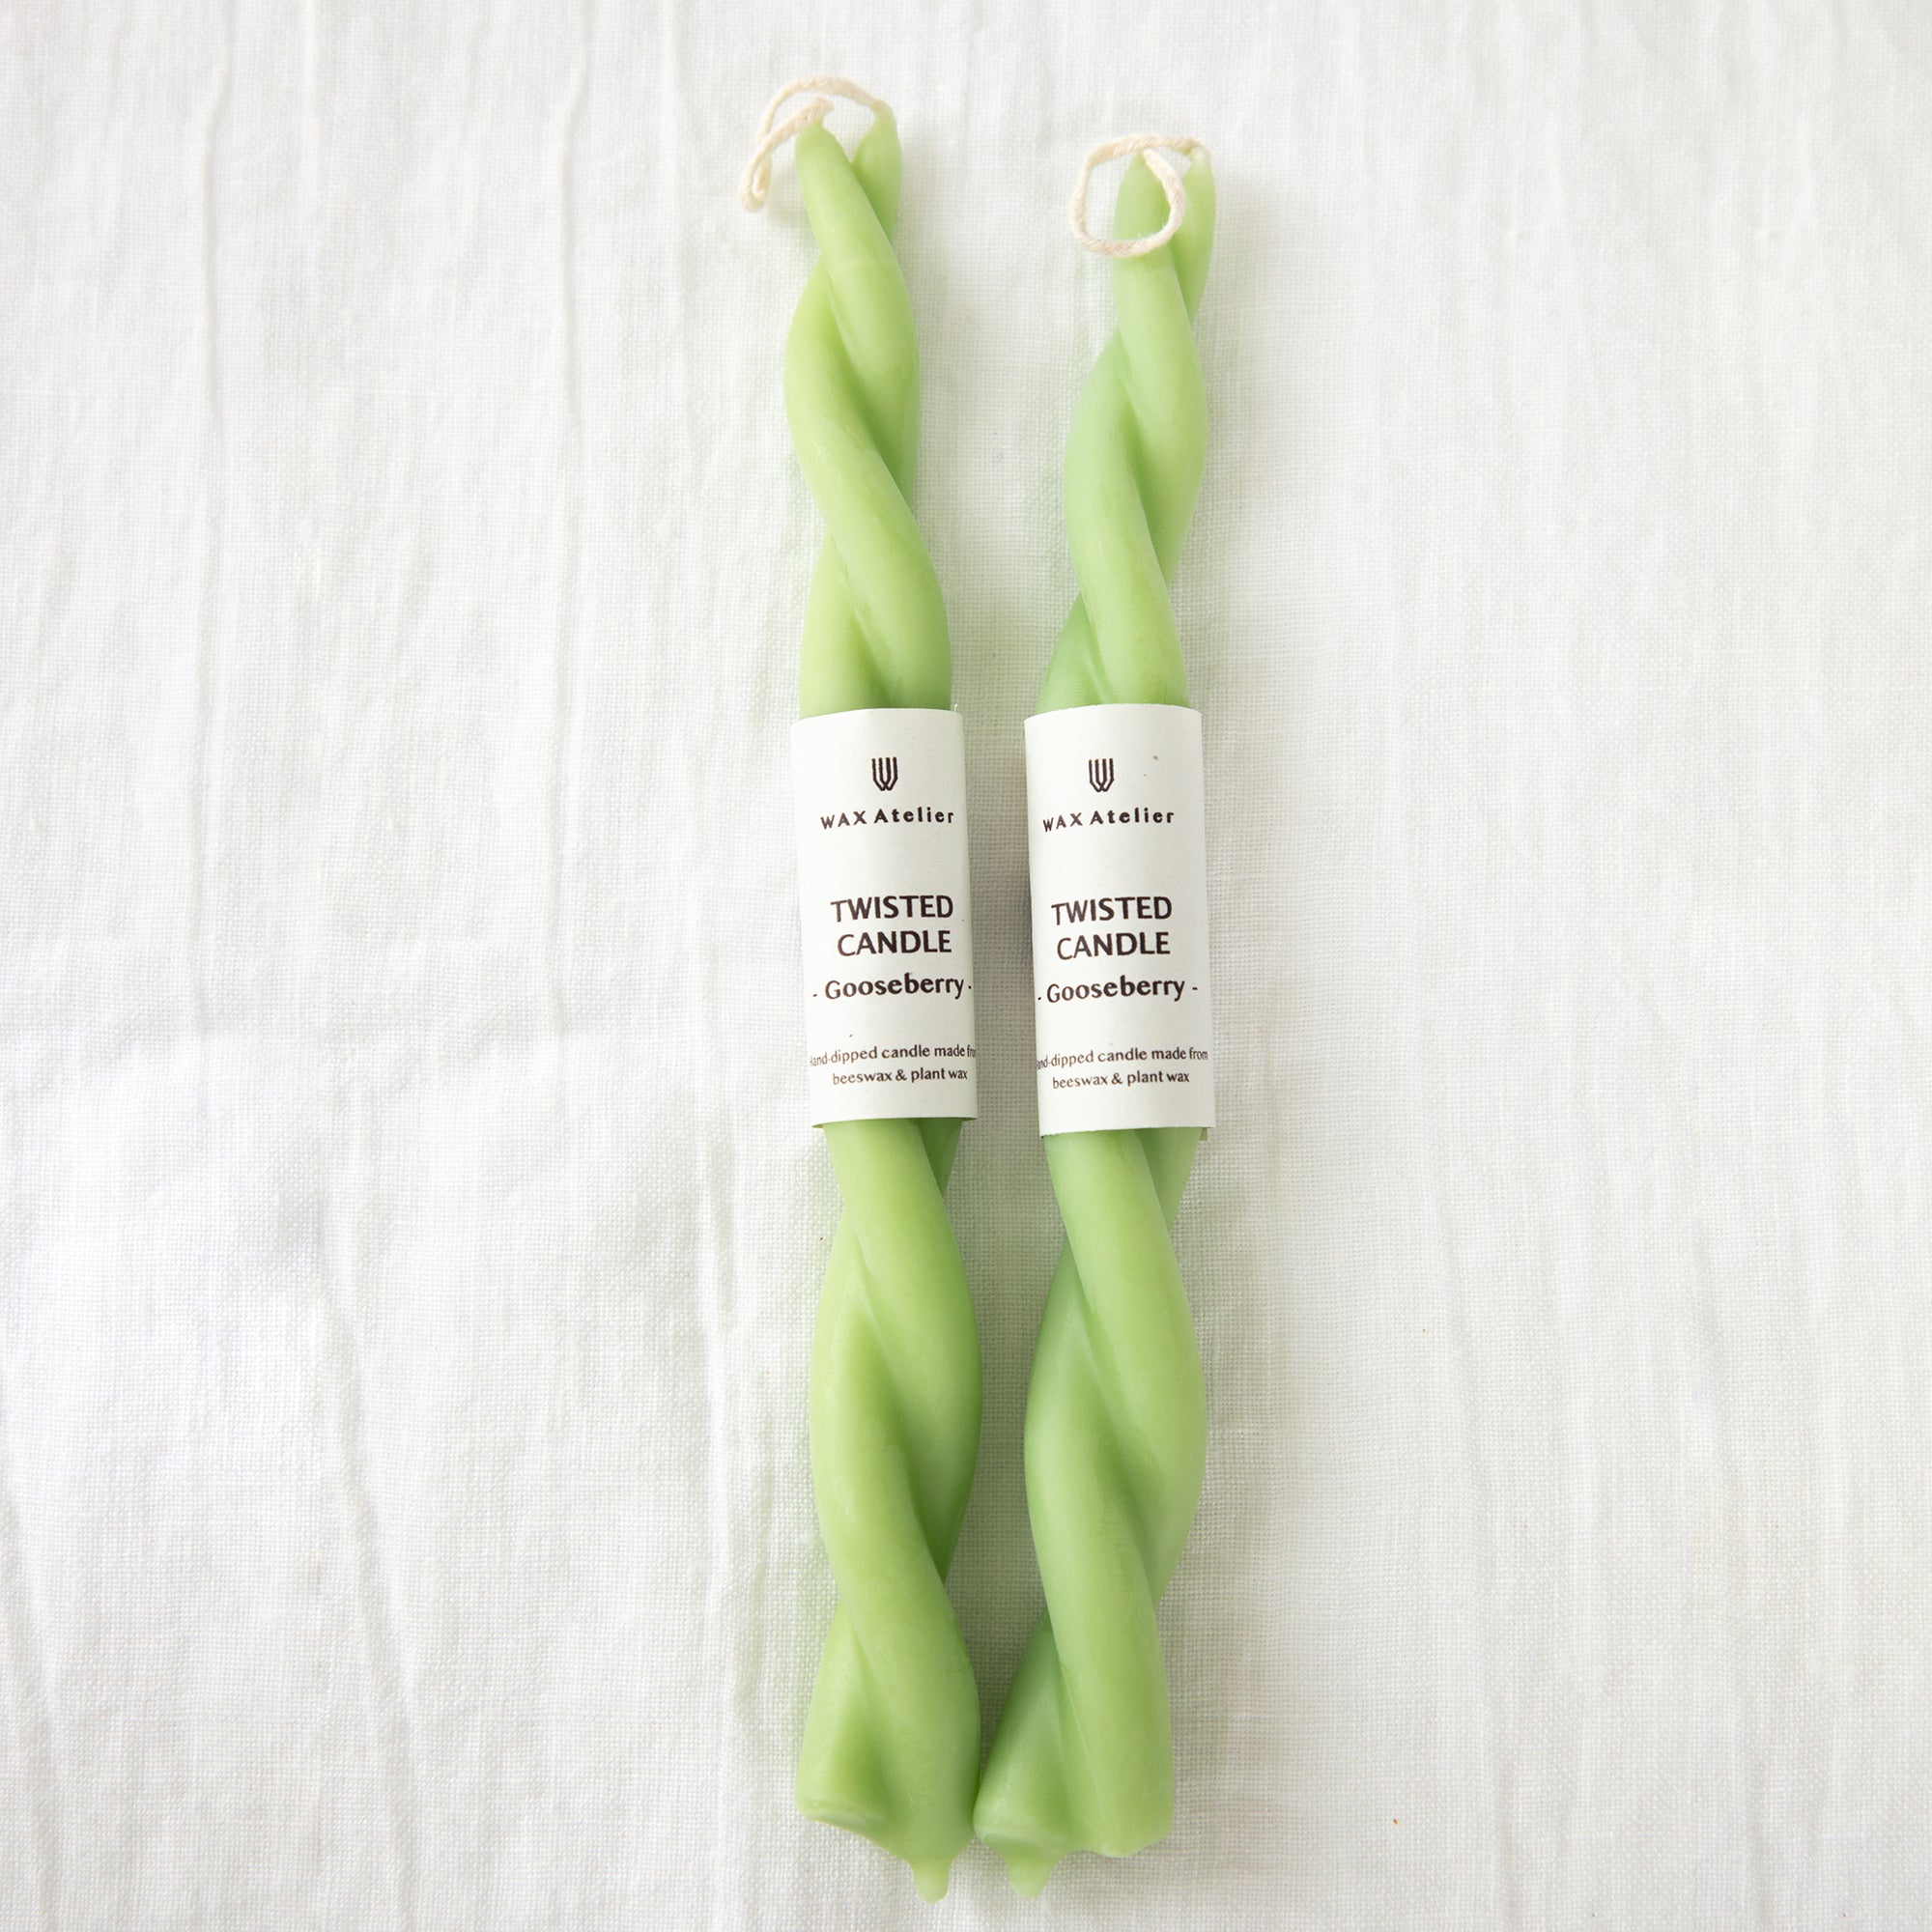 Wax Atelier Twisted Candle Pair - Gooseberry